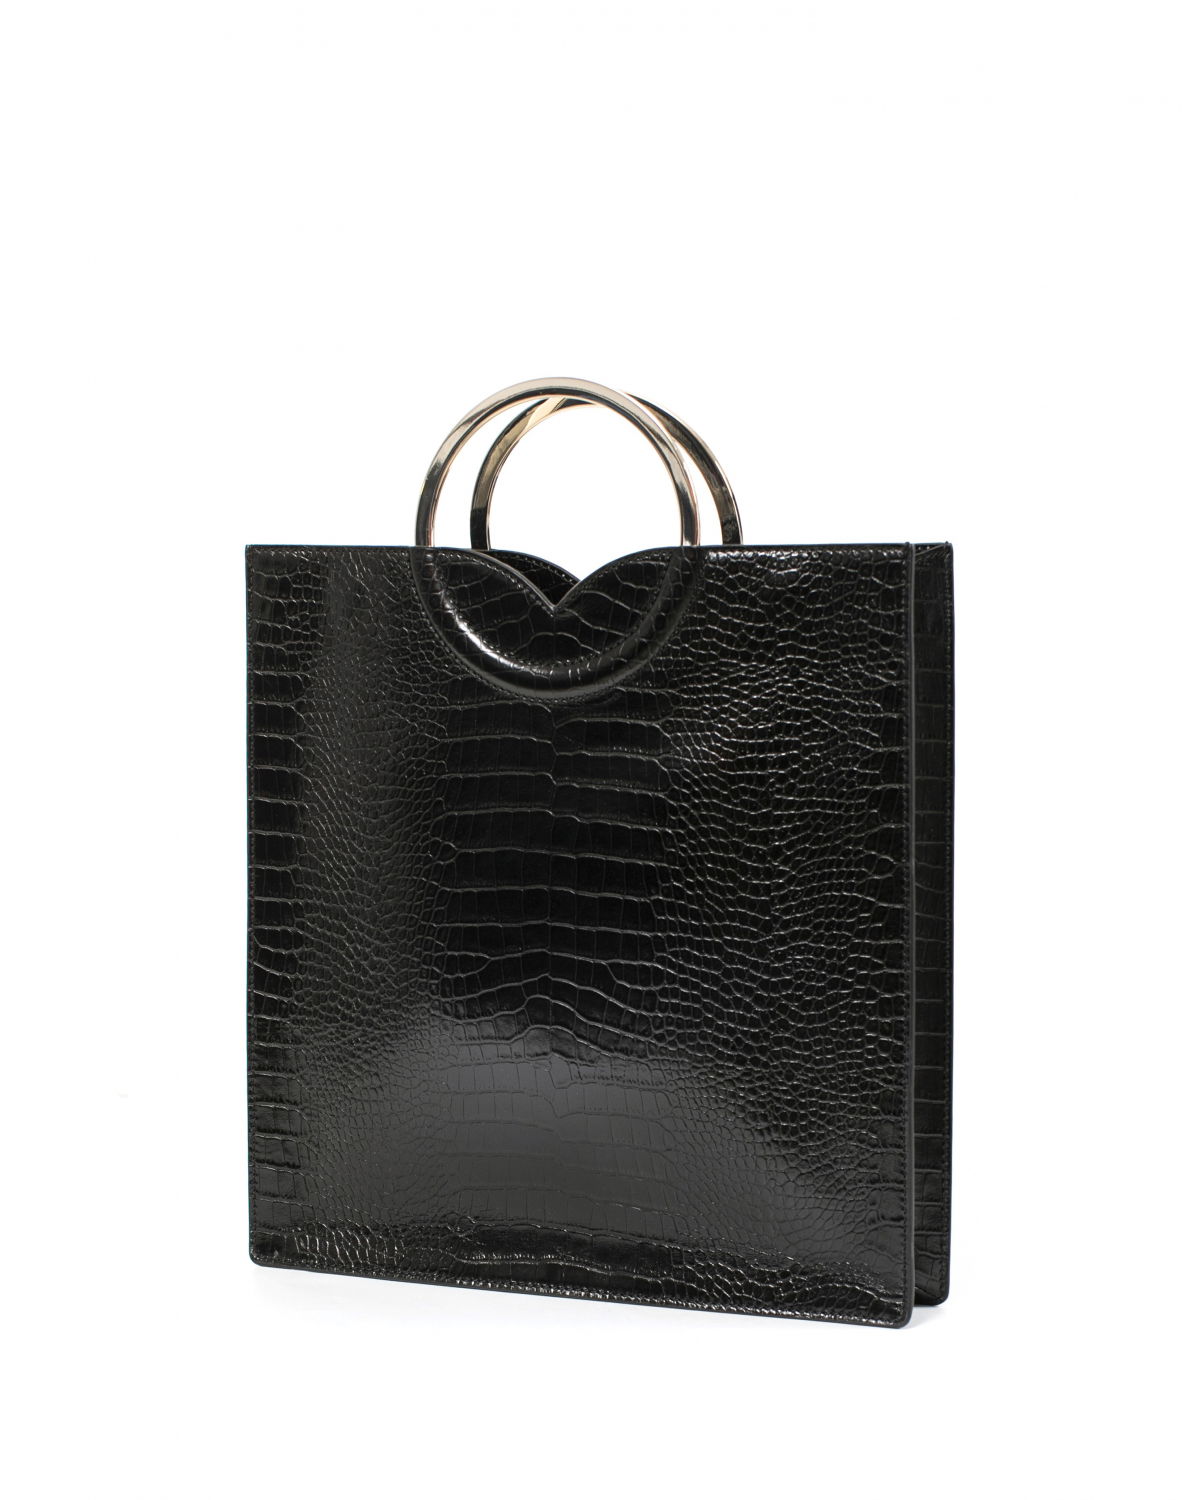 Black leather square bag with round metal handles | -40% | Genny